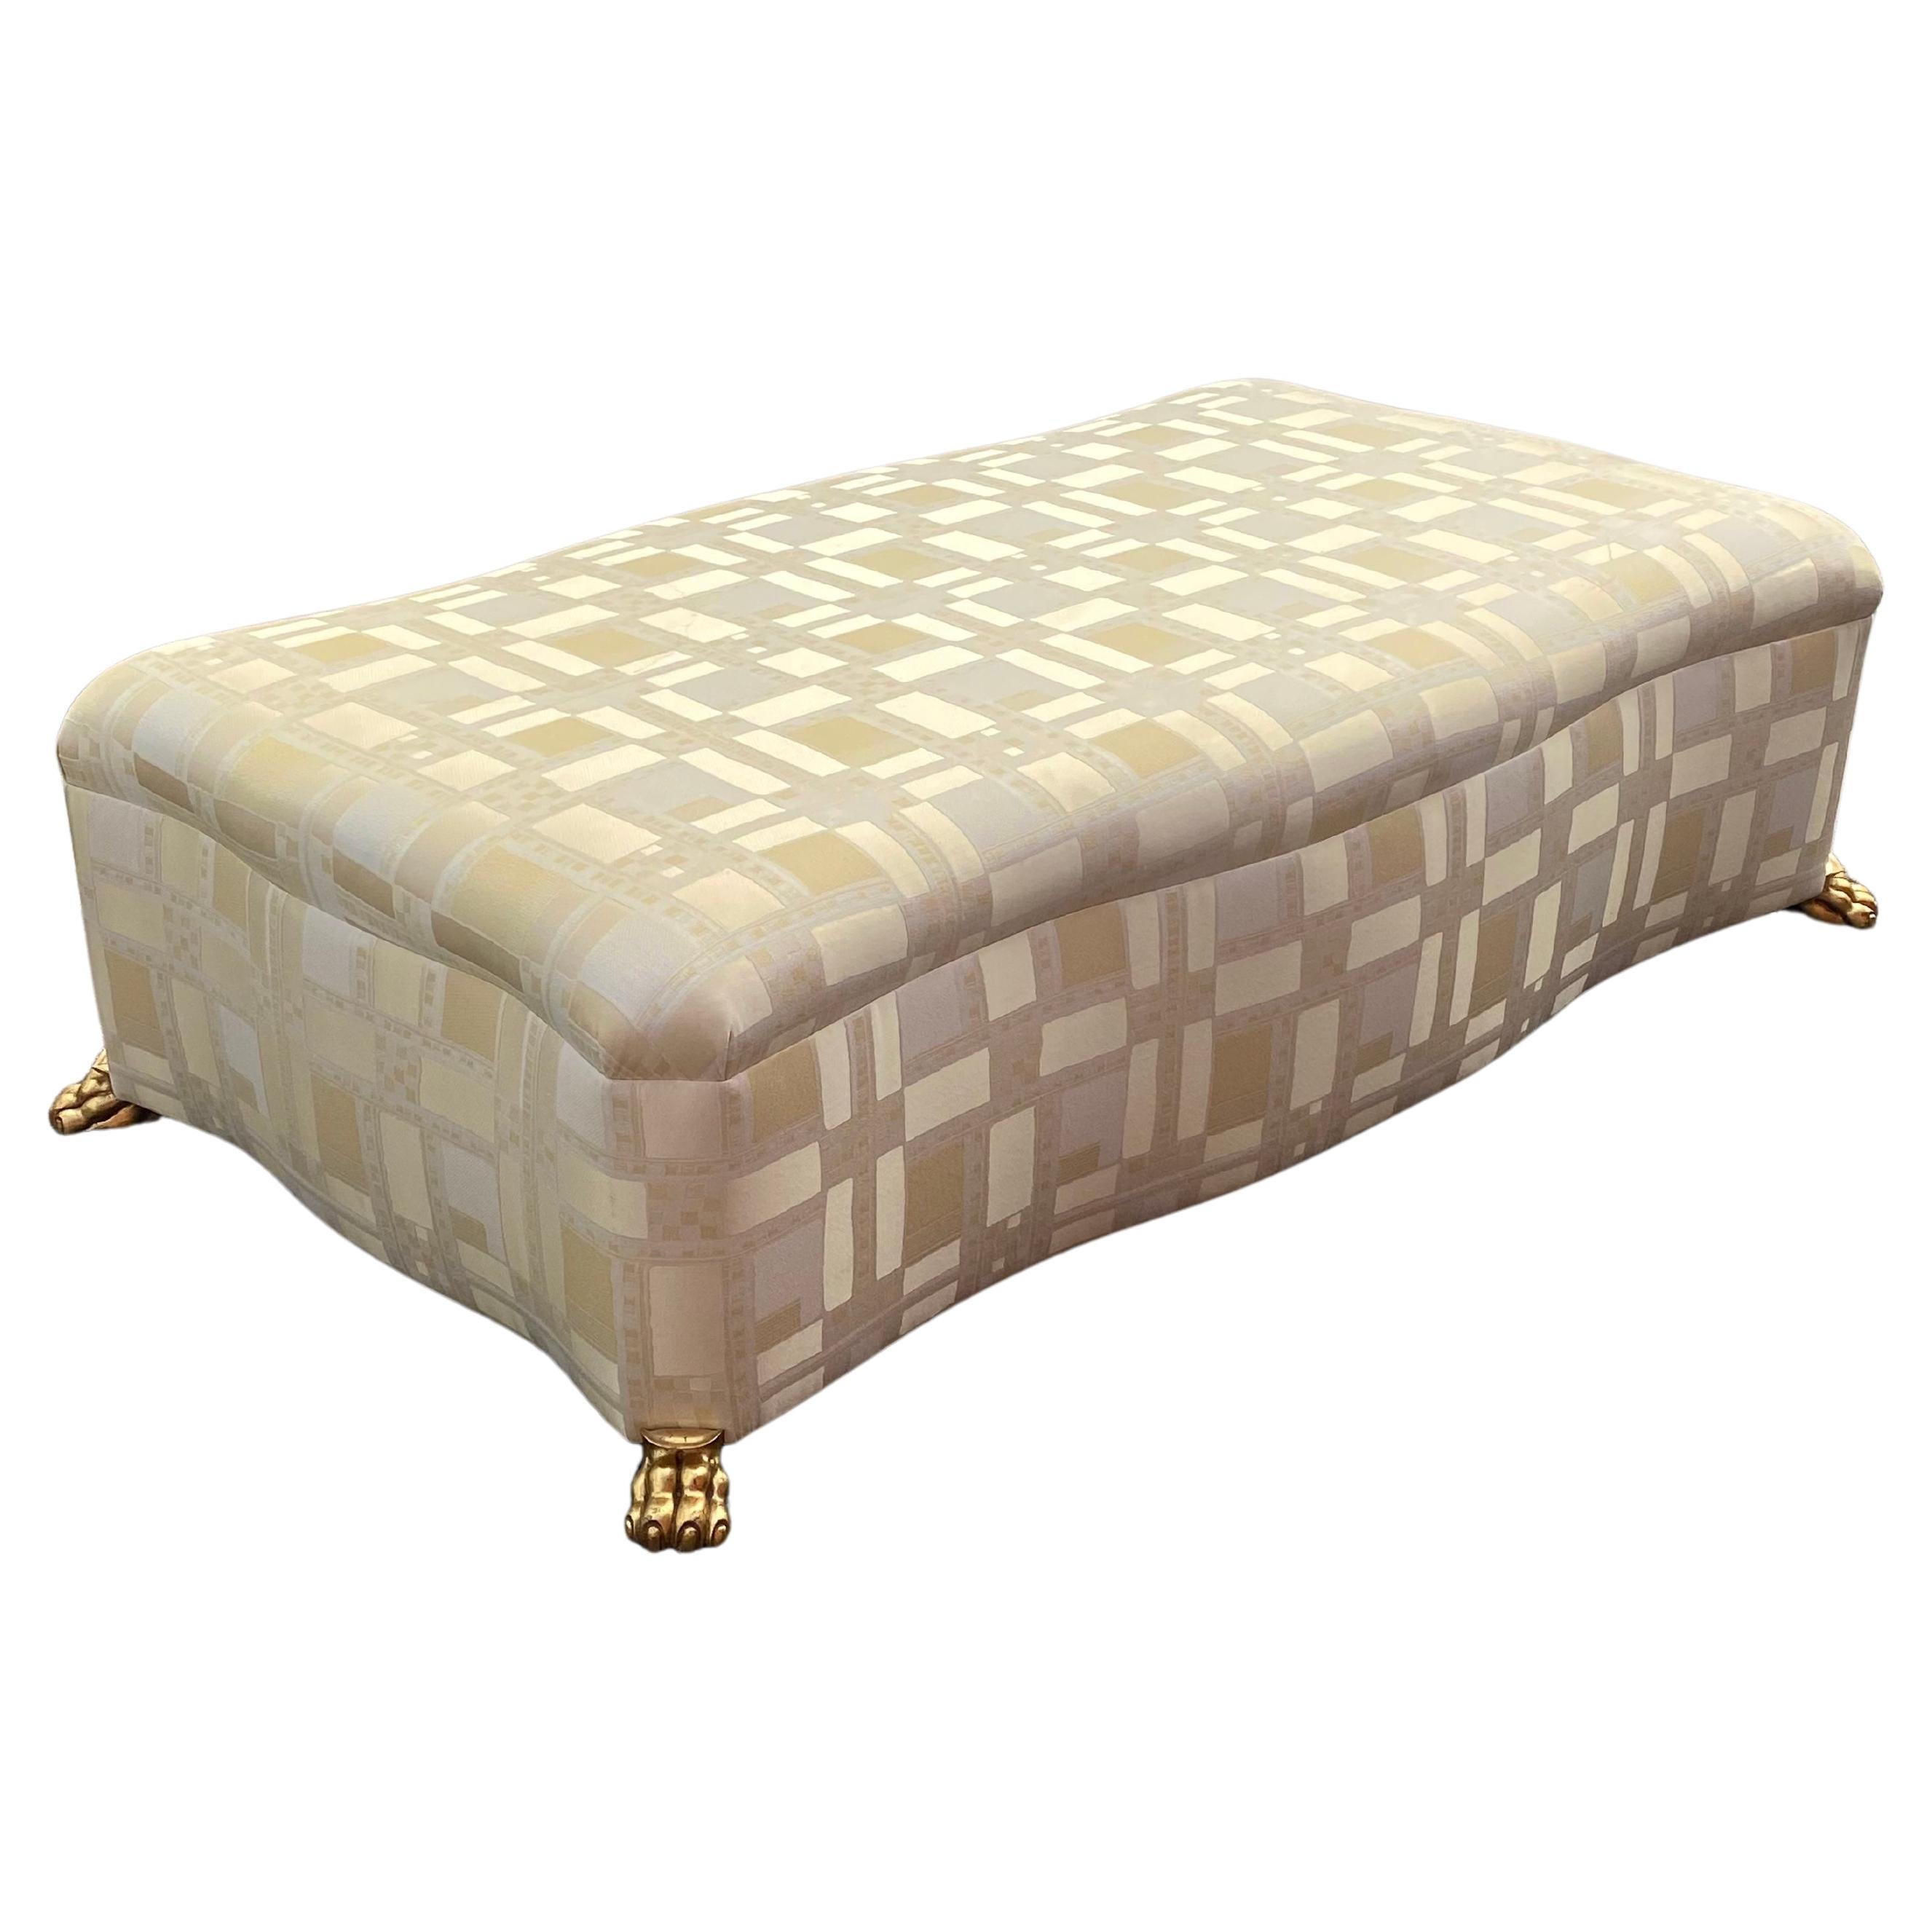 1980s Empire Style Sculptural Daybed Bench Ottoman For Sale